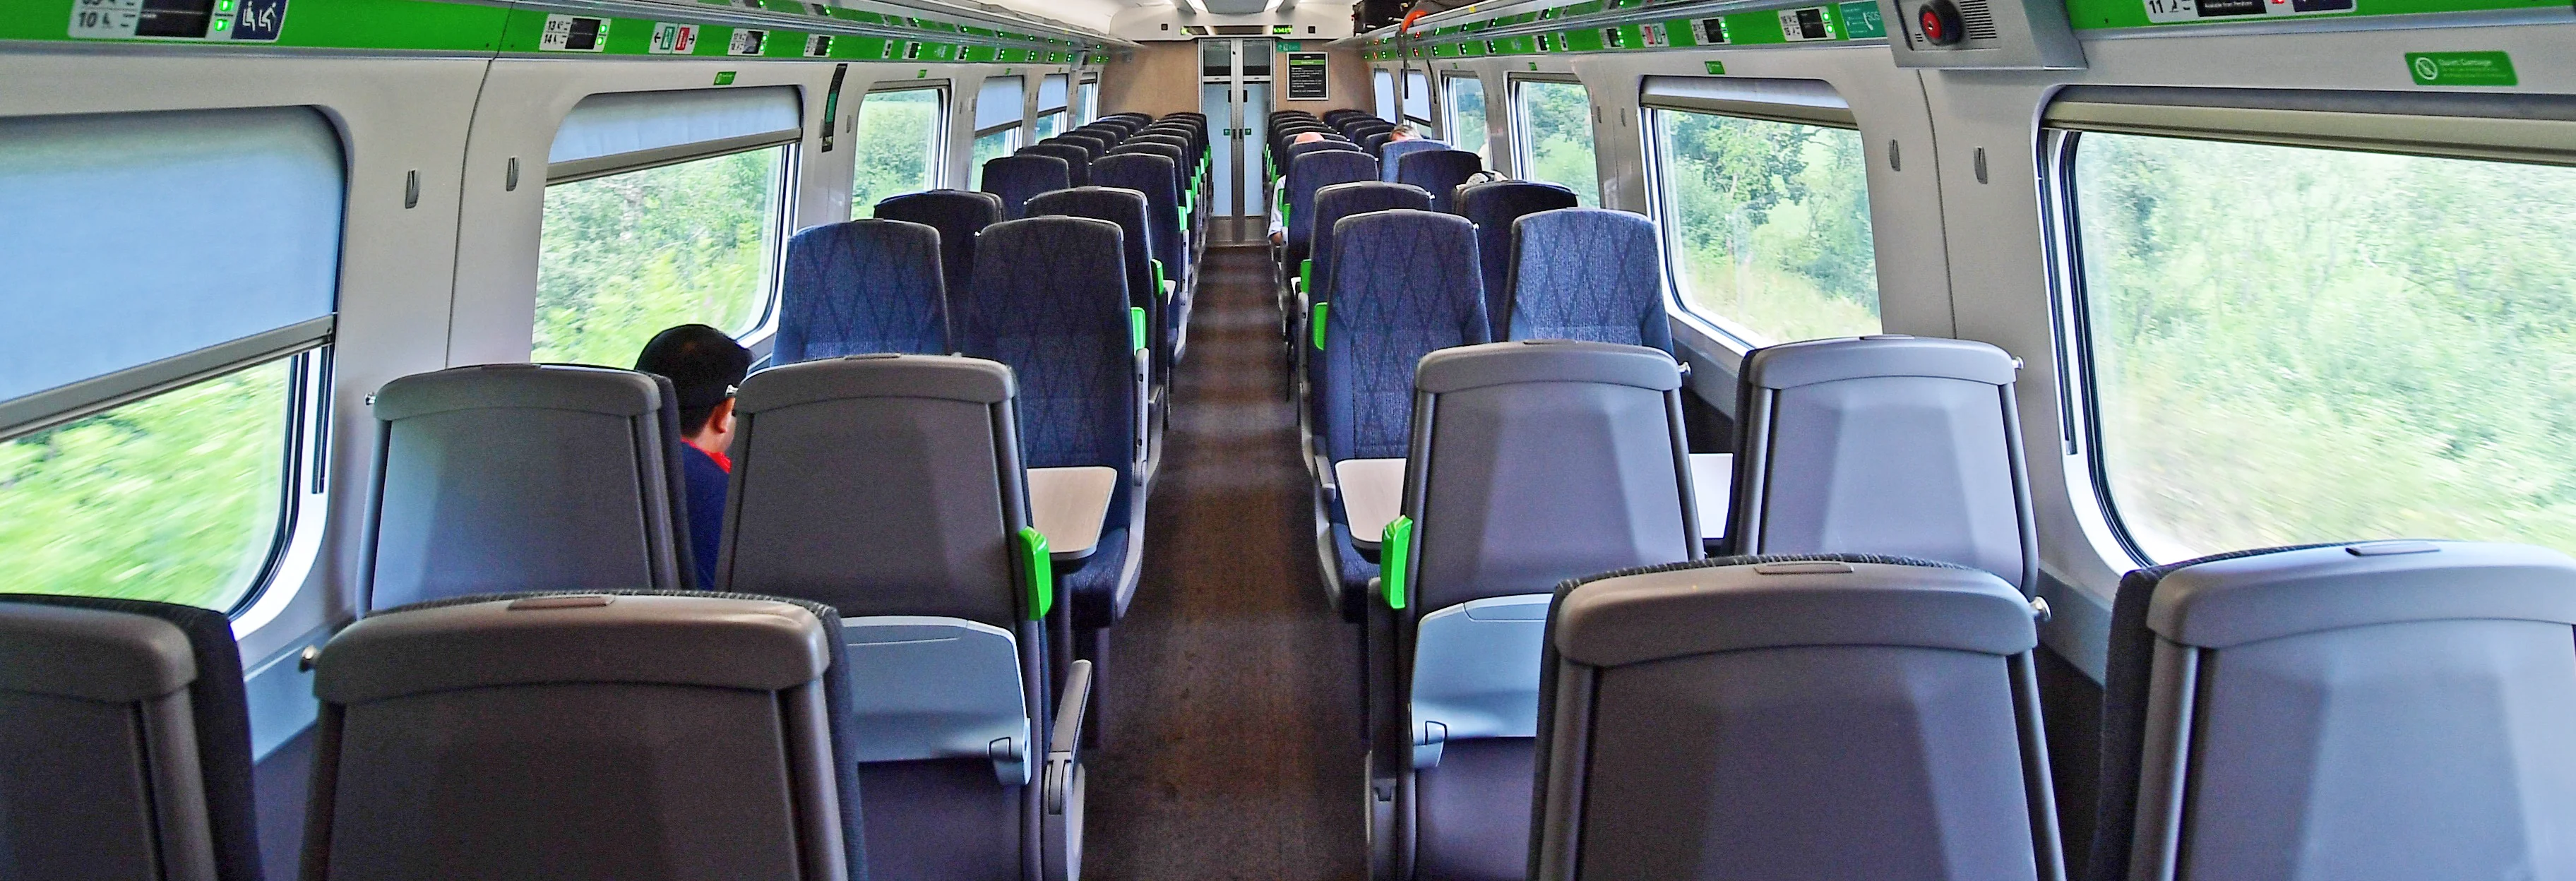 A train carriage with a number of empty seats showing green lights for unreserved seating